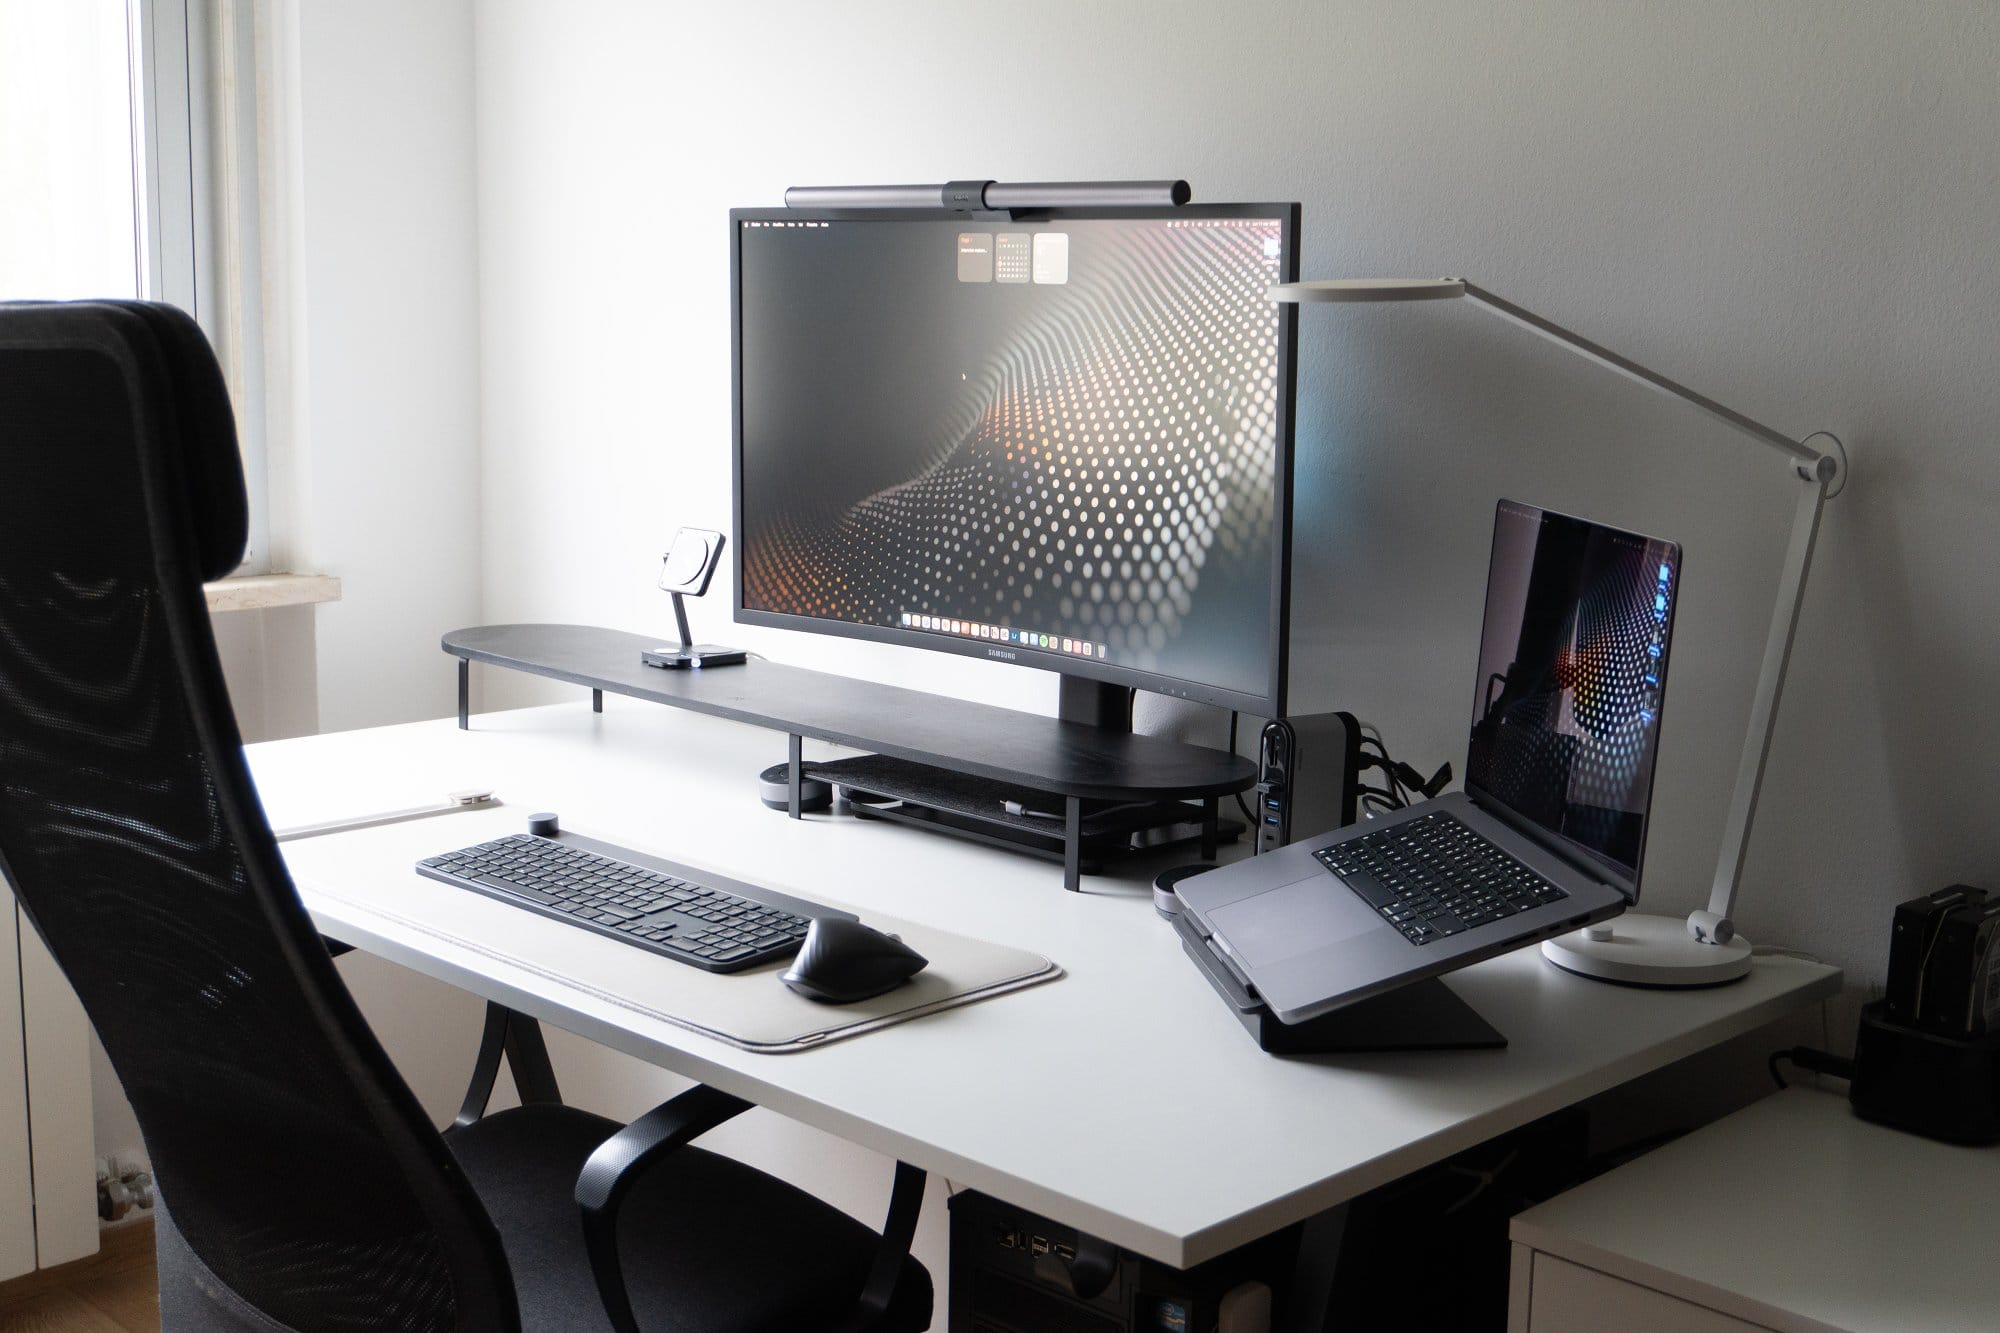 A tidy workspace with a monitor, laptop on a stand, desk lamp, keyboard and mouse, set on a white desk beside an ergonomic chair